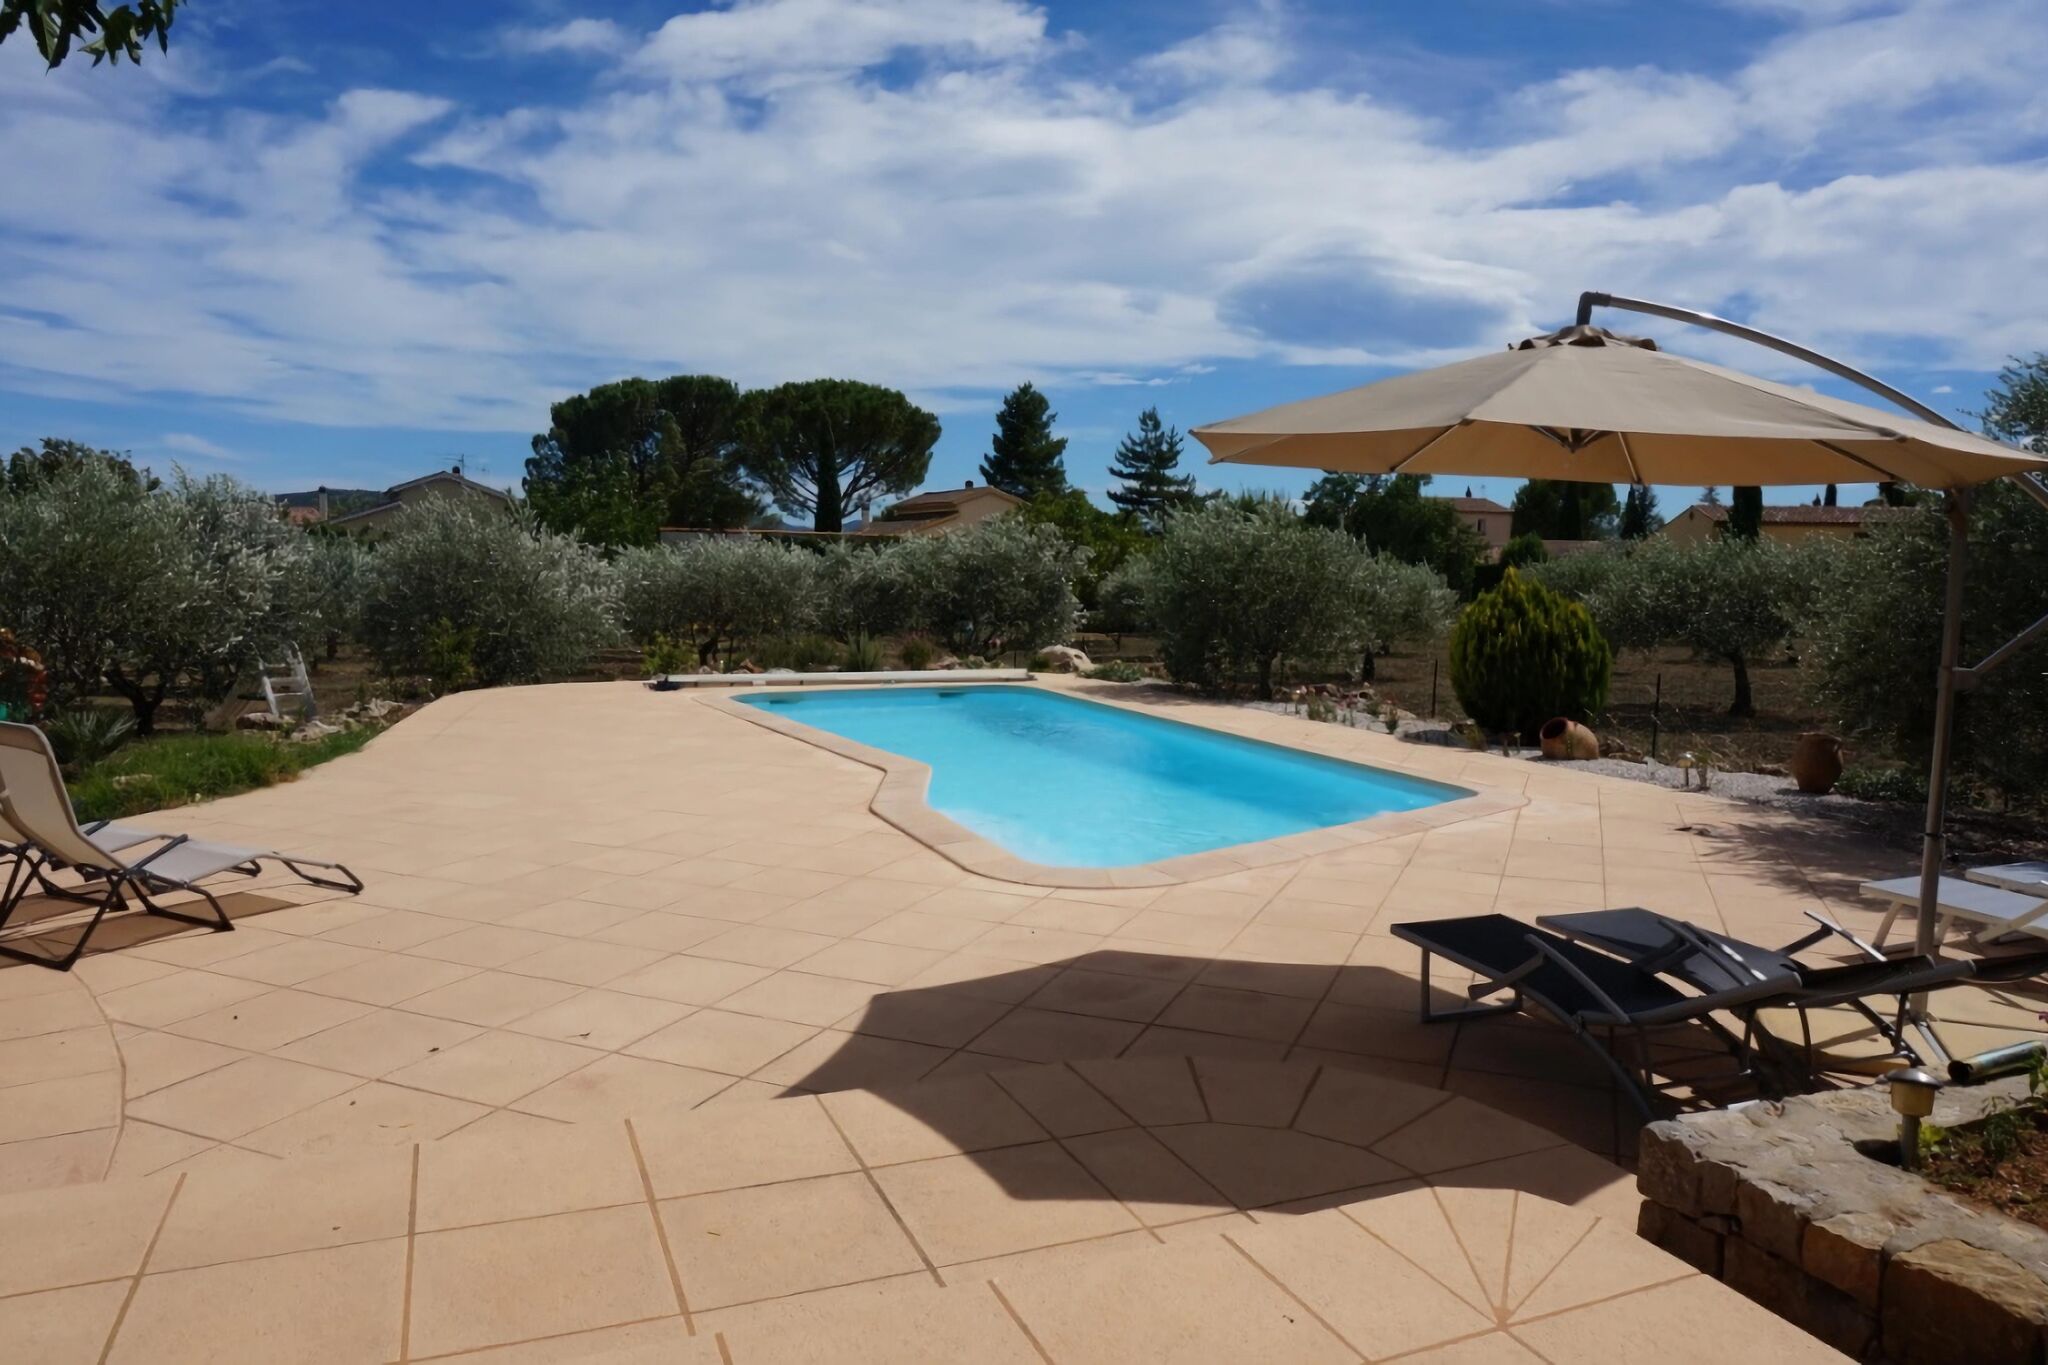 Beautiful holiday home in Les-Arcs -Sur-Argens with pool